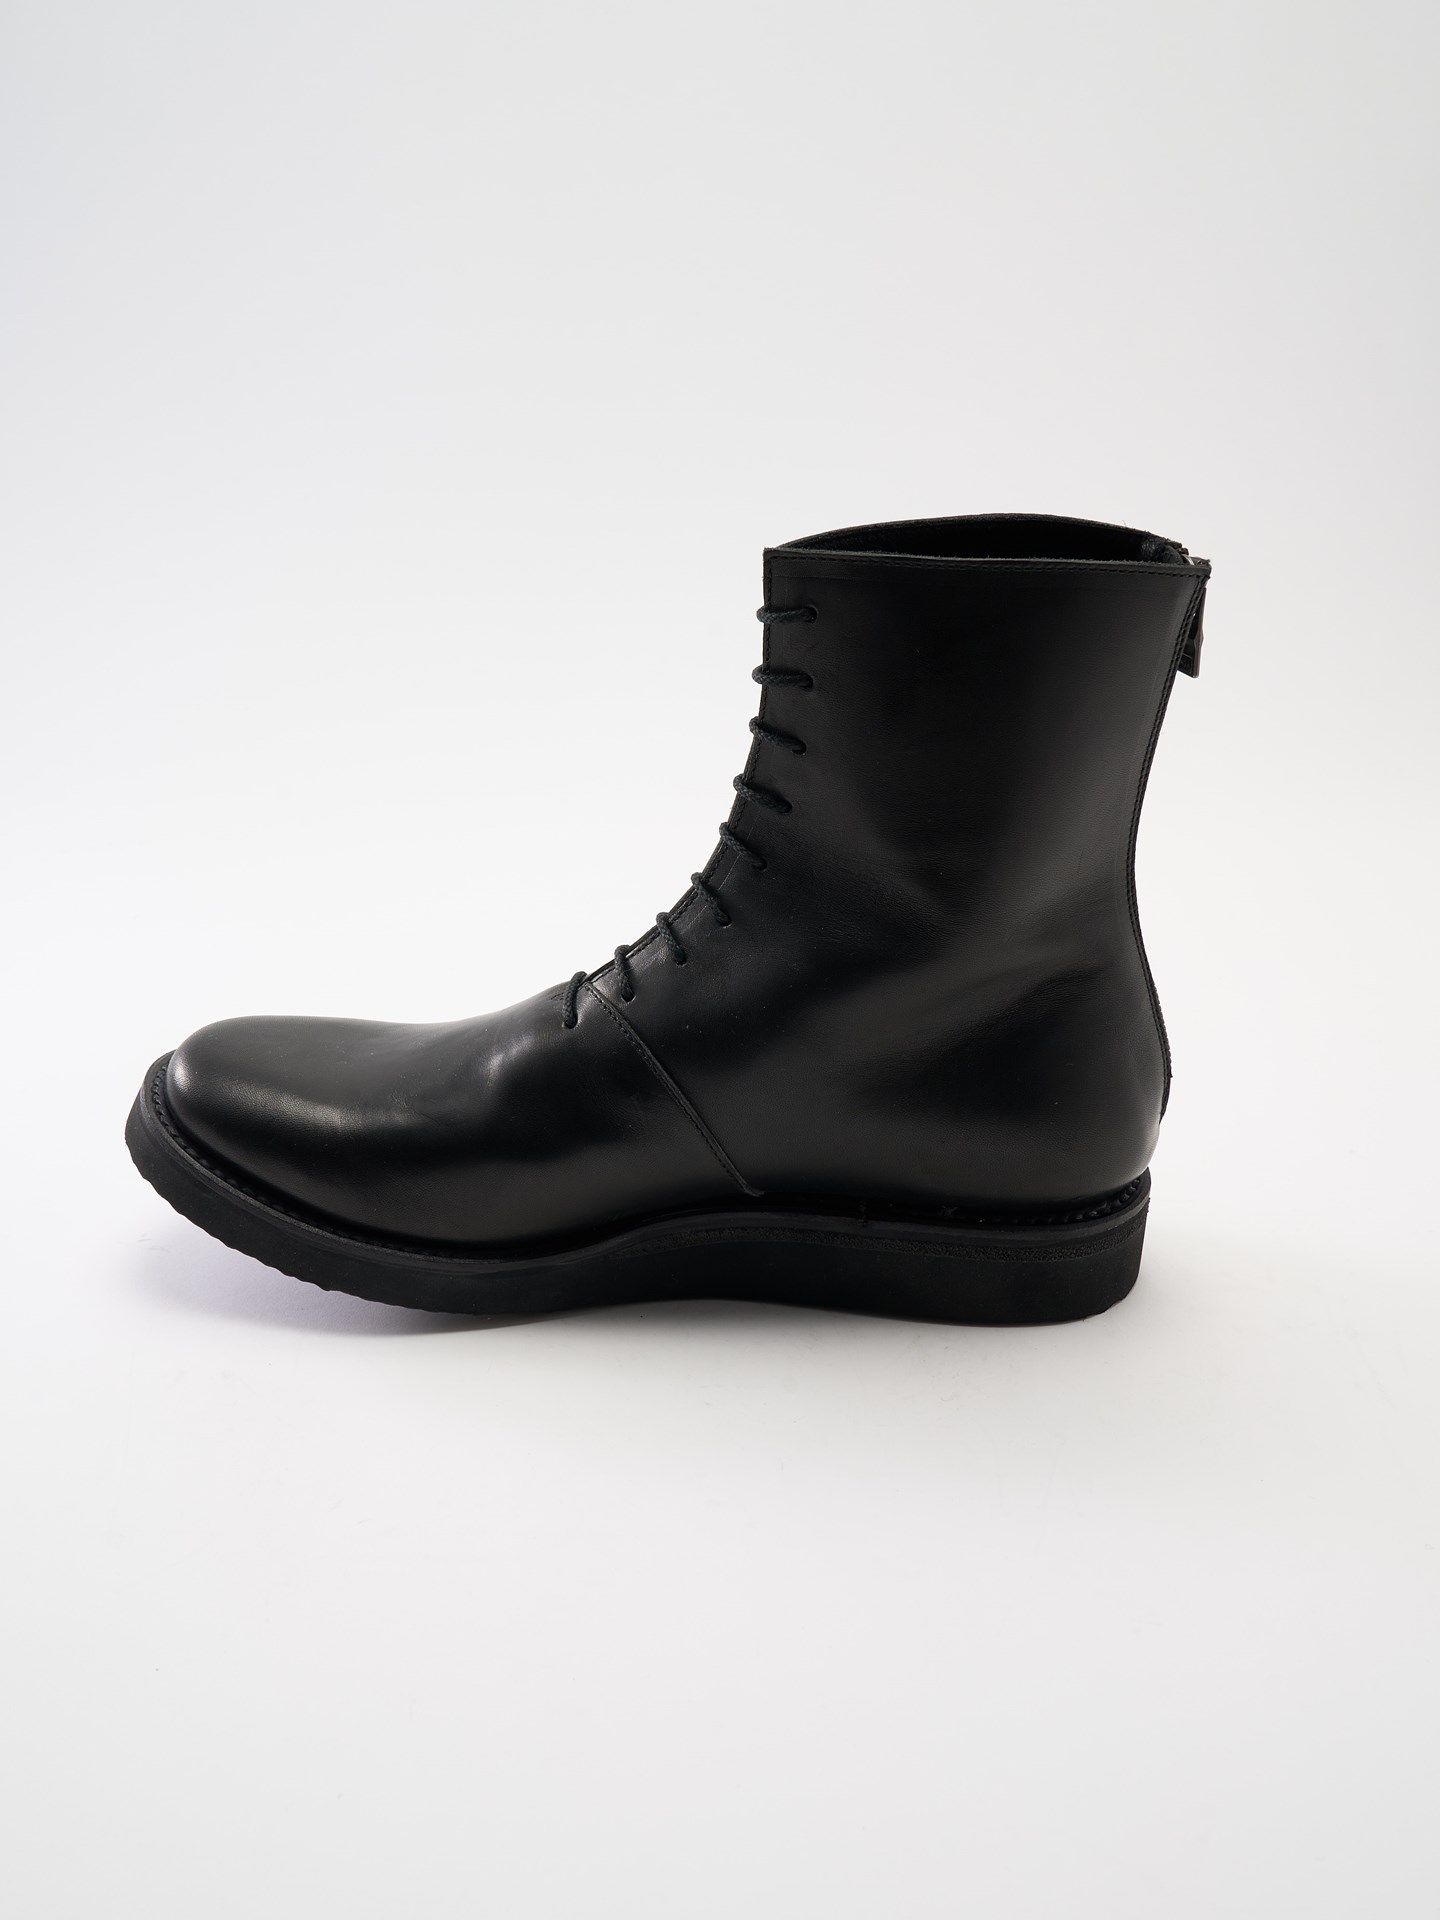 wjk - 【予約品4月8日10時締め】 back zip boots(function sole 